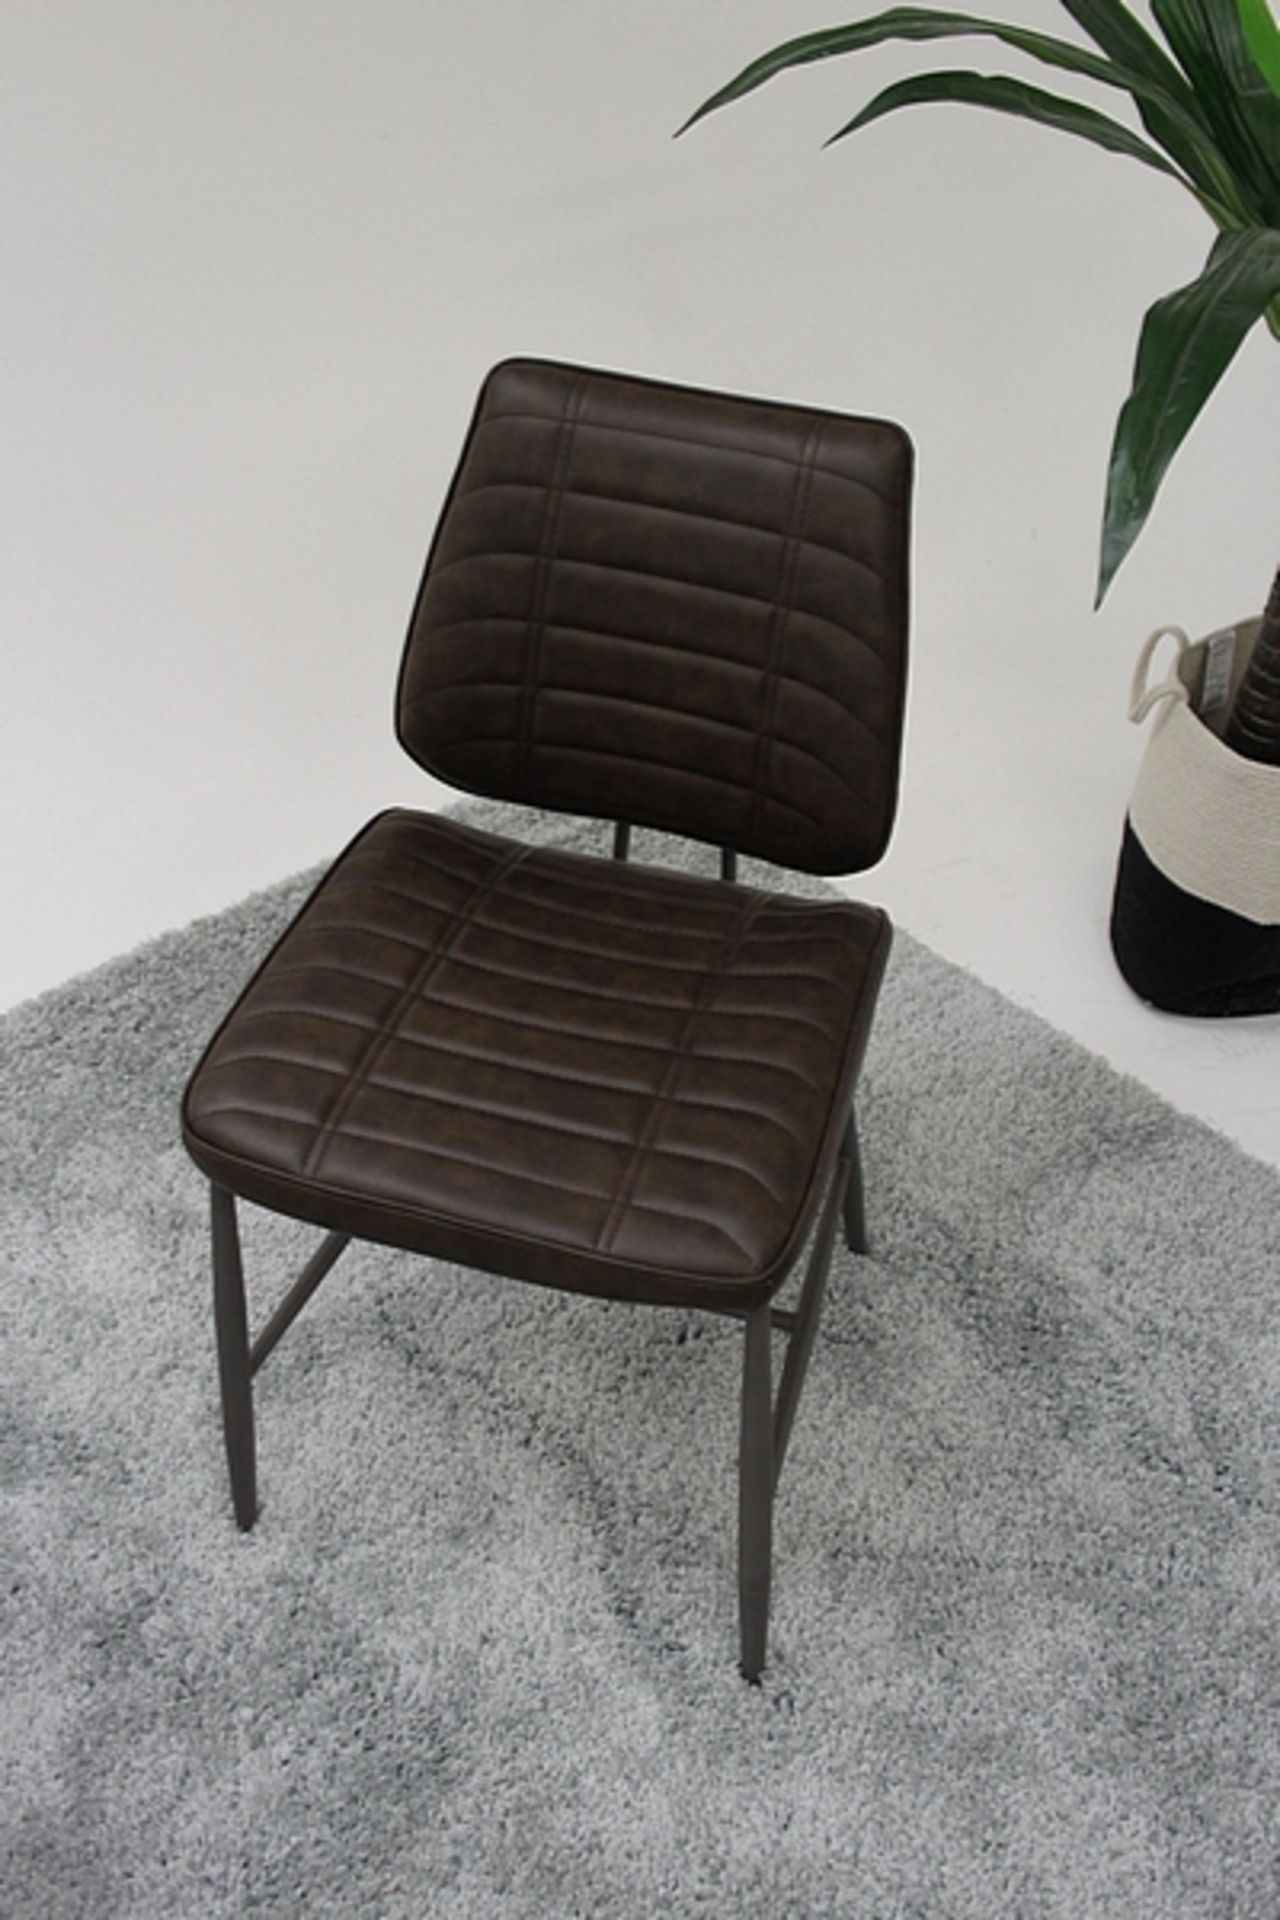 Cortina Side Chair - Image 3 of 3